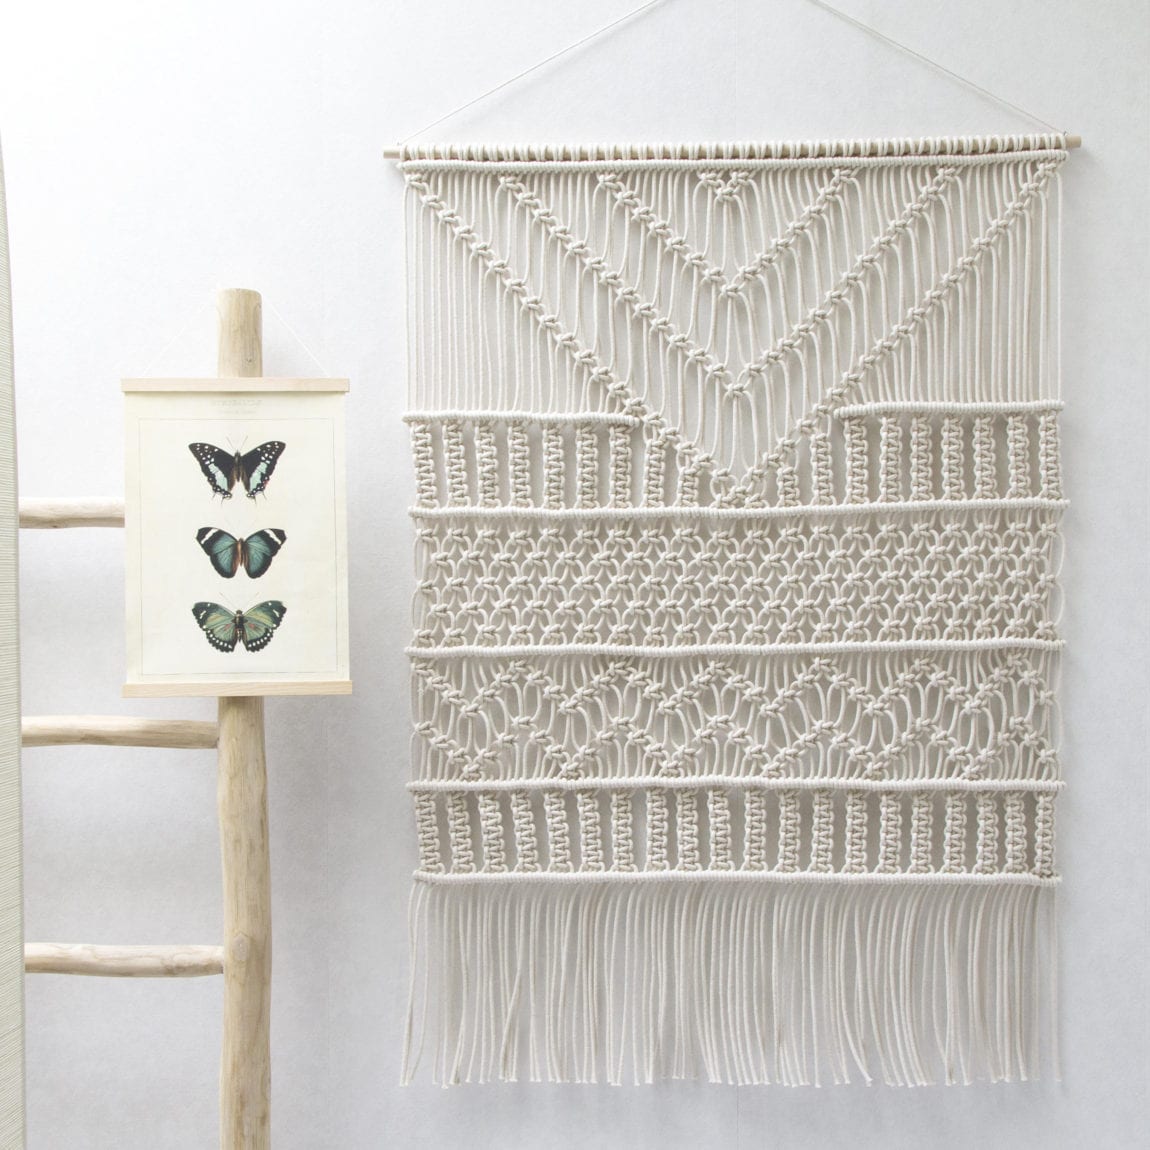 34 of The Best Macrame Hanging & Textile Art Ideas on Any Budget